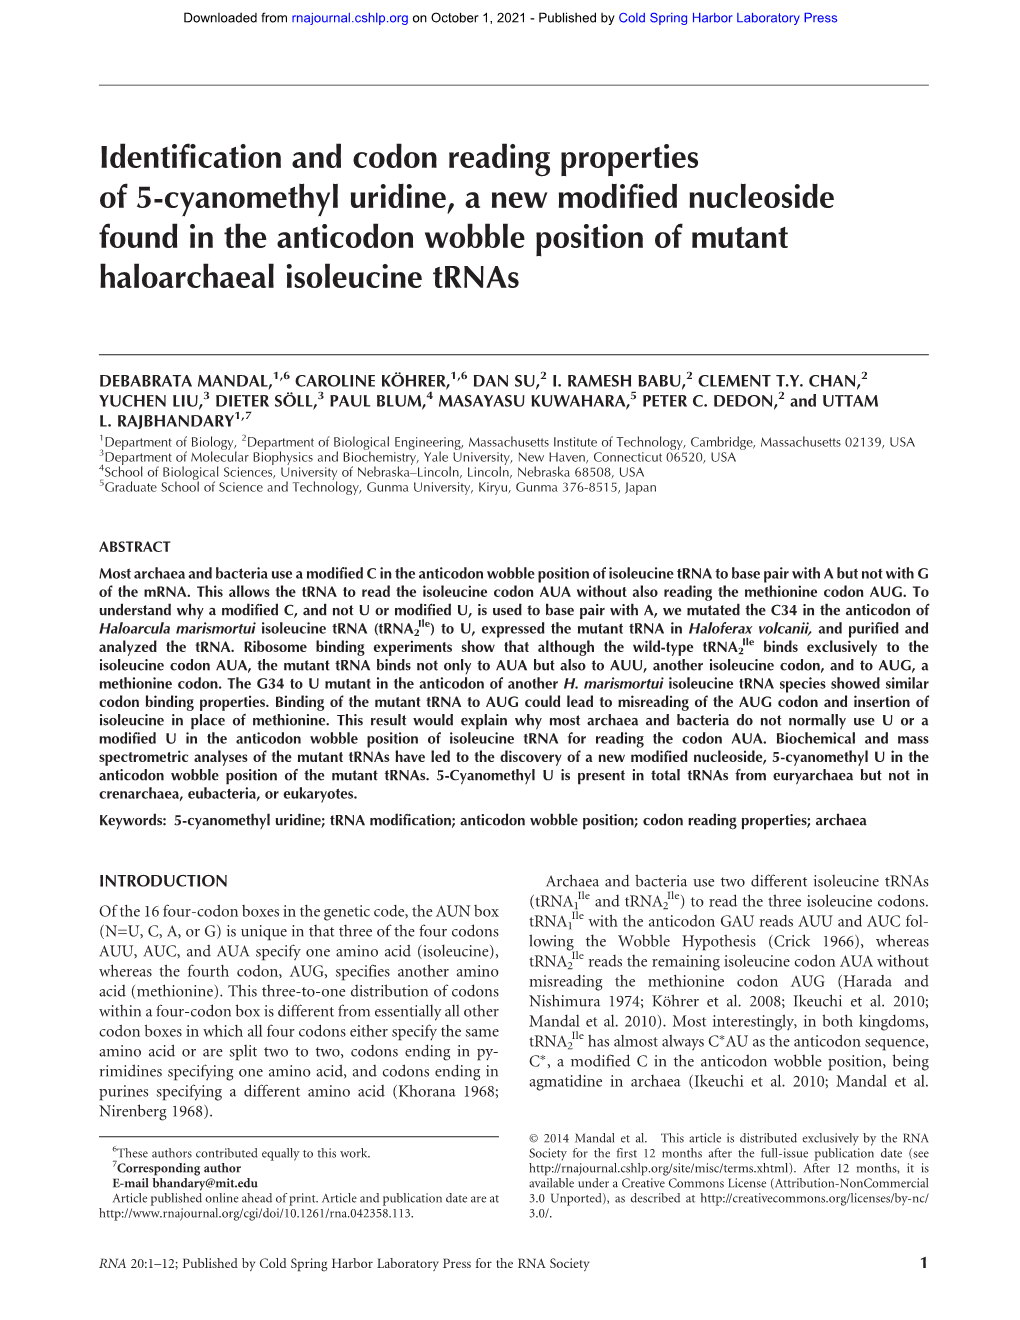 Identification and Codon Reading Properties of 5-Cyanomethyl Uridine, a New Modified Nucleoside Found in the Anticodon Wobble Po